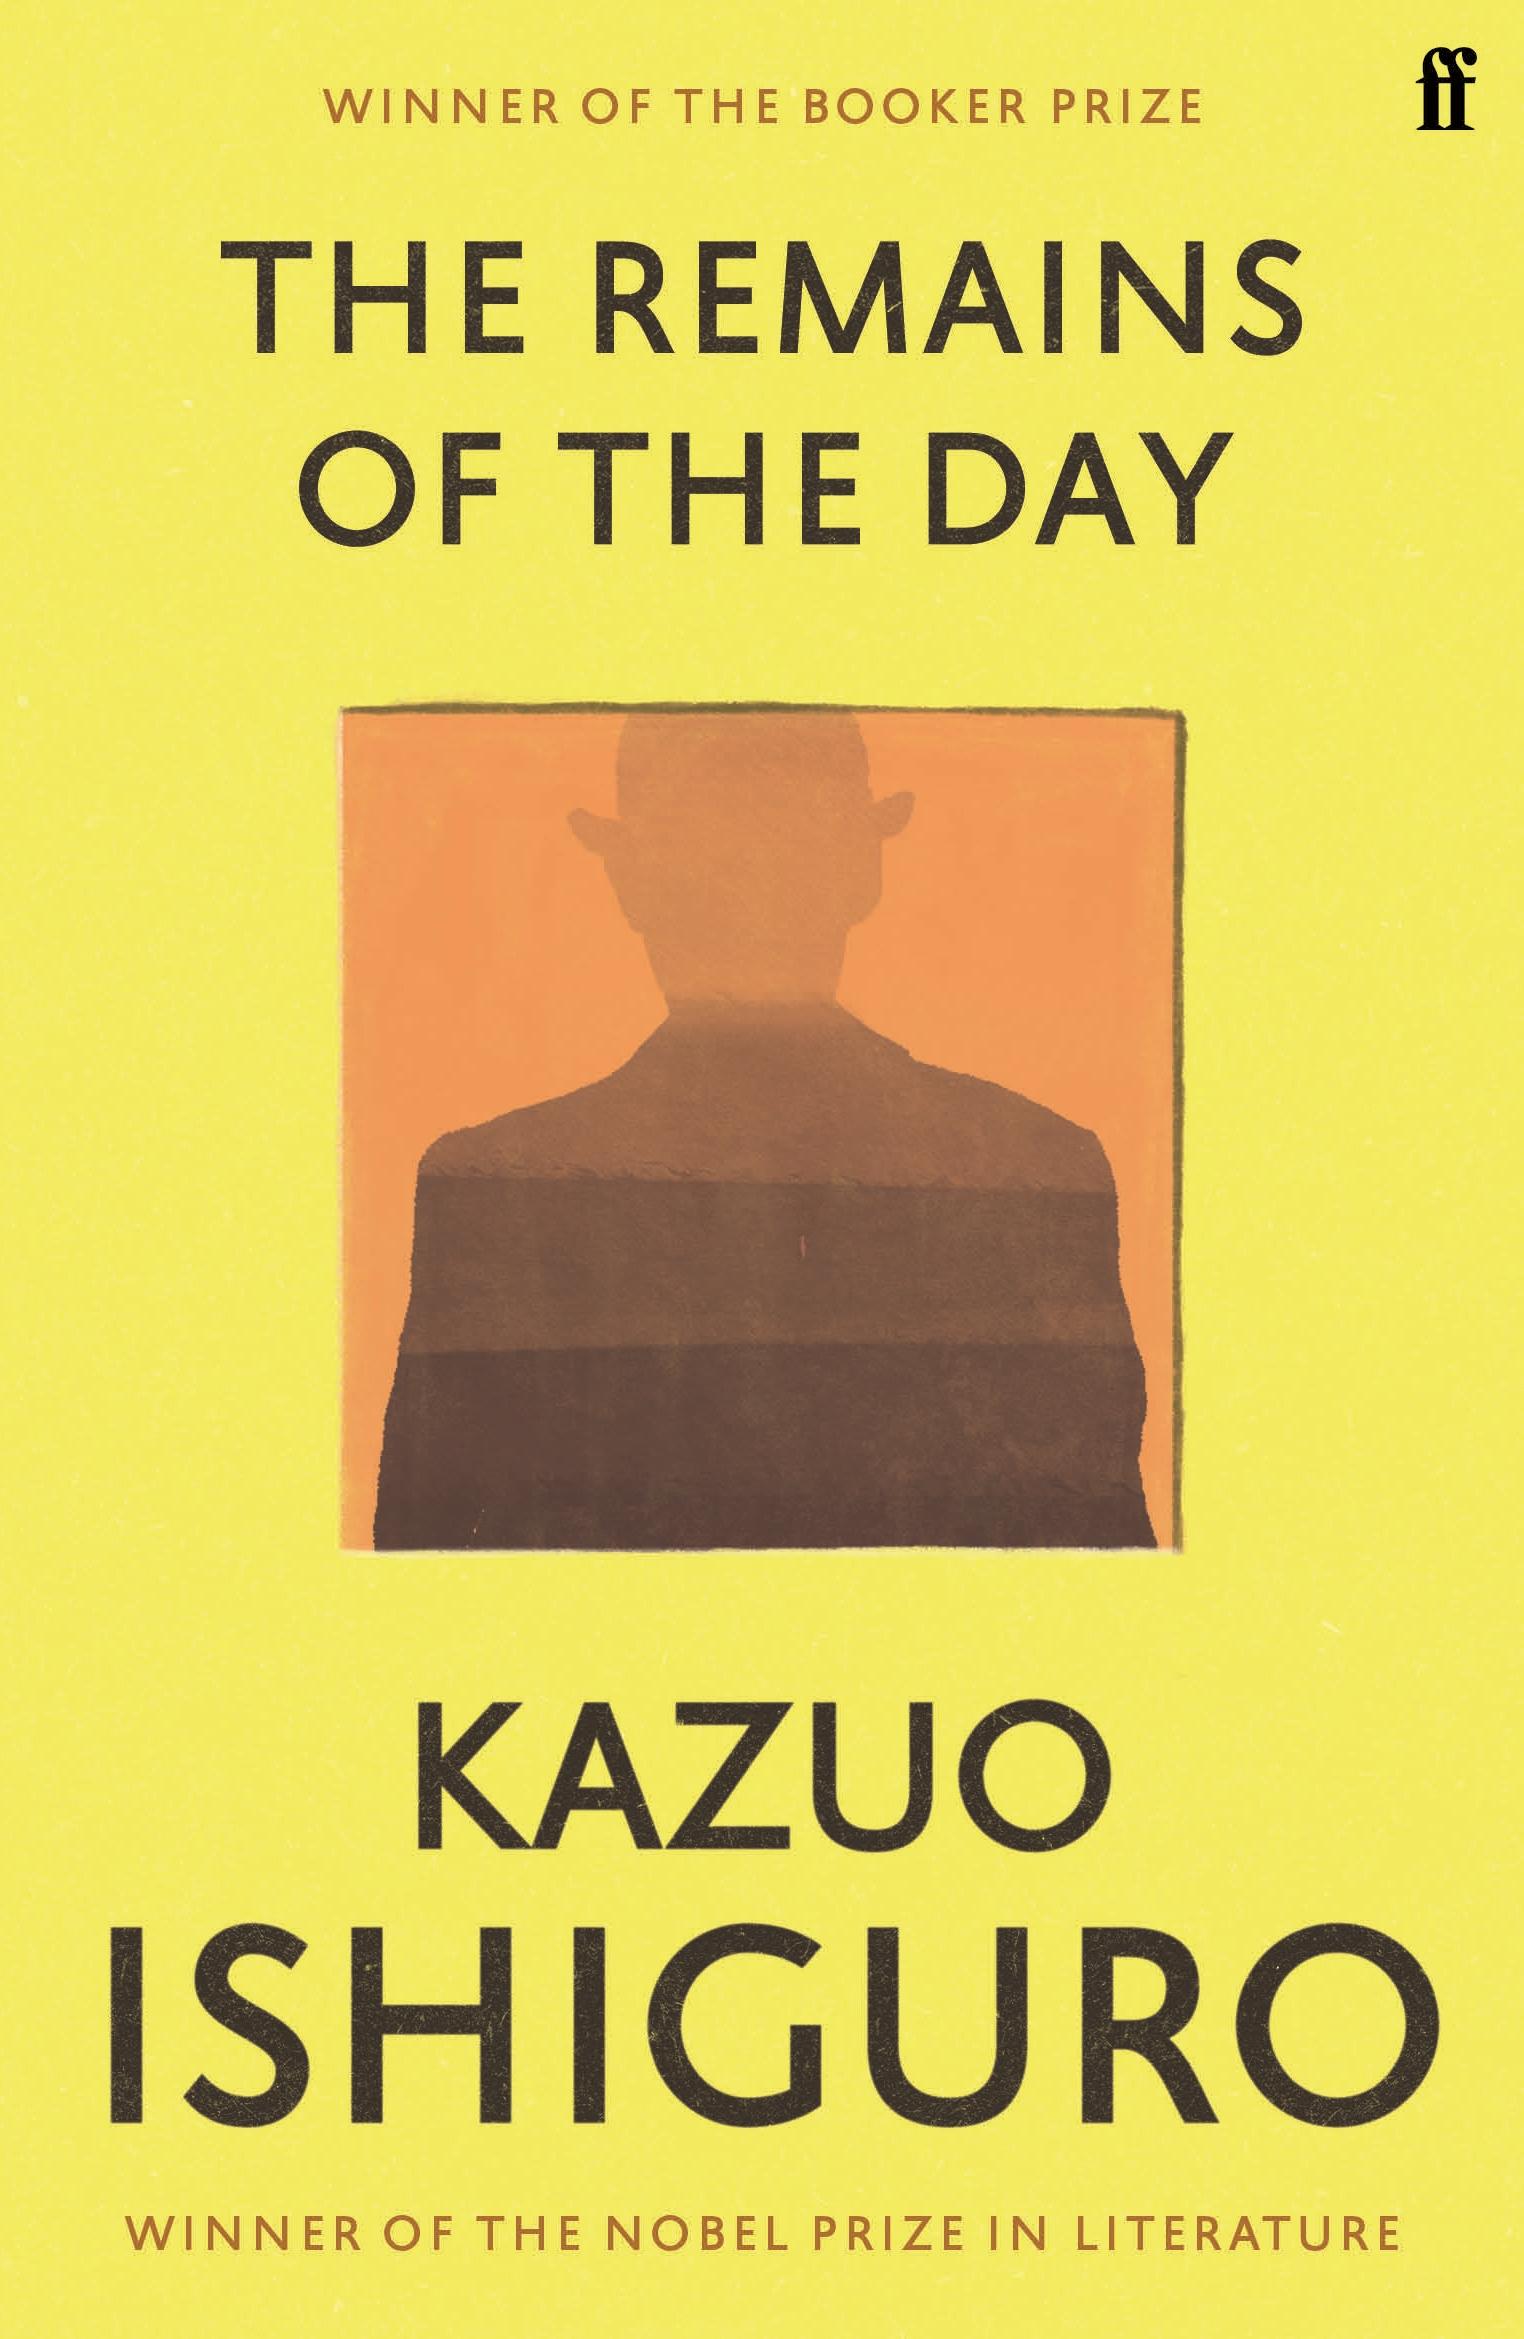 The Remains of the Day / Kazuo Ishiguro / Taschenbuch / 258 S. / Englisch / 2010 / Faber And Faber Ltd. / EAN 9780571258246 - Ishiguro, Kazuo